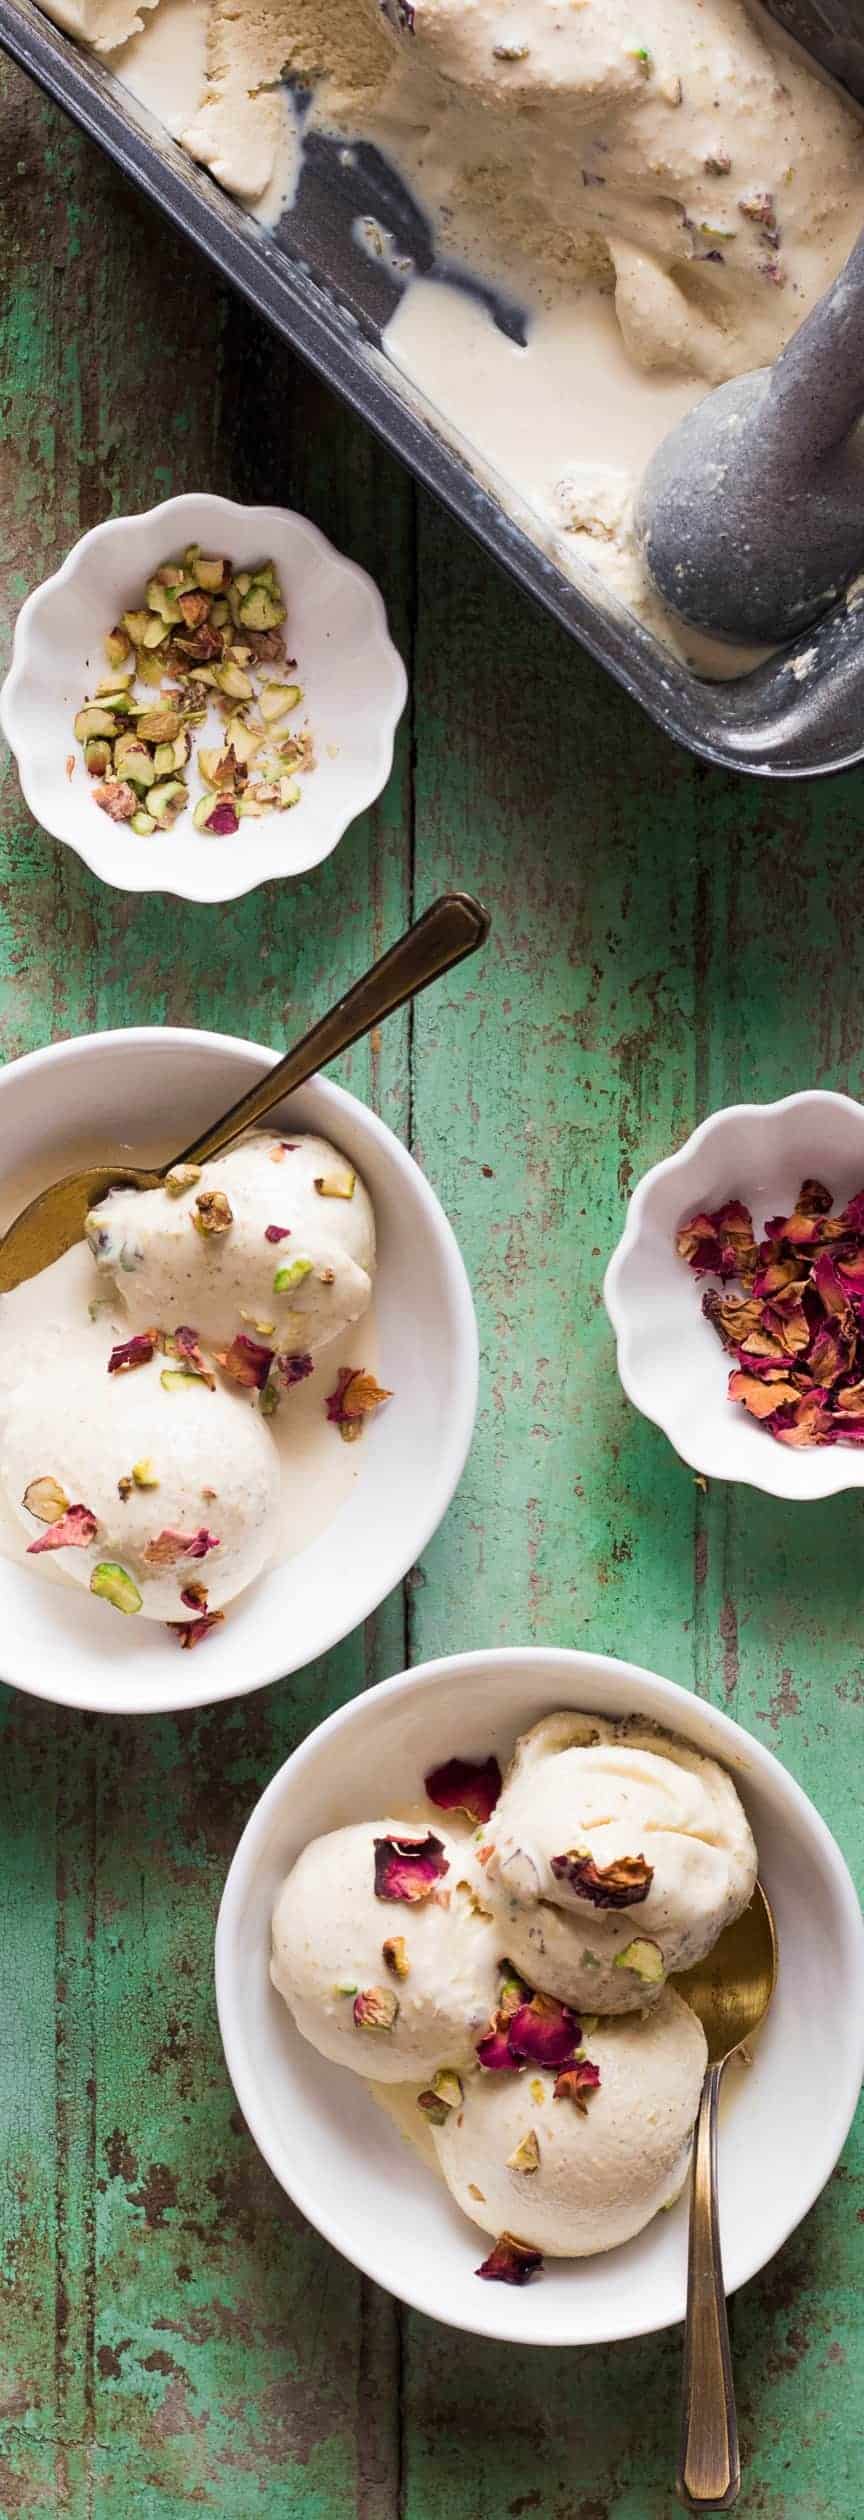 scoops of thandai ice cream served in bowls